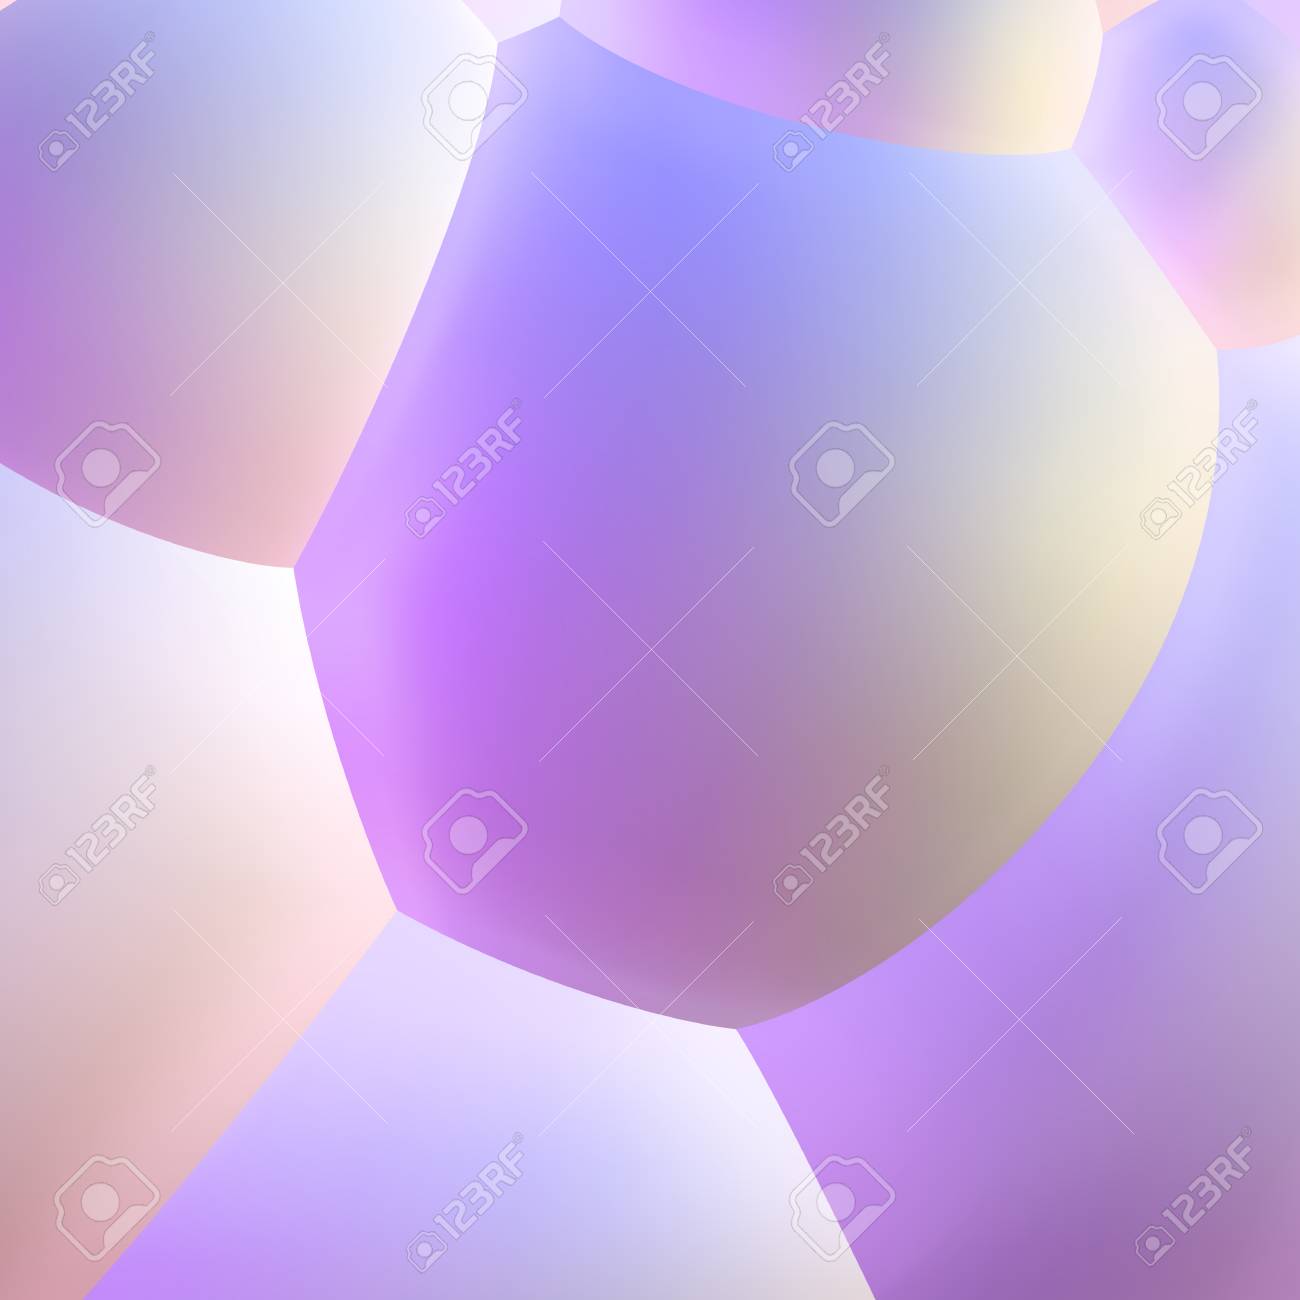 Abstract Background With Pearlescent Bubbles Balls Royalty